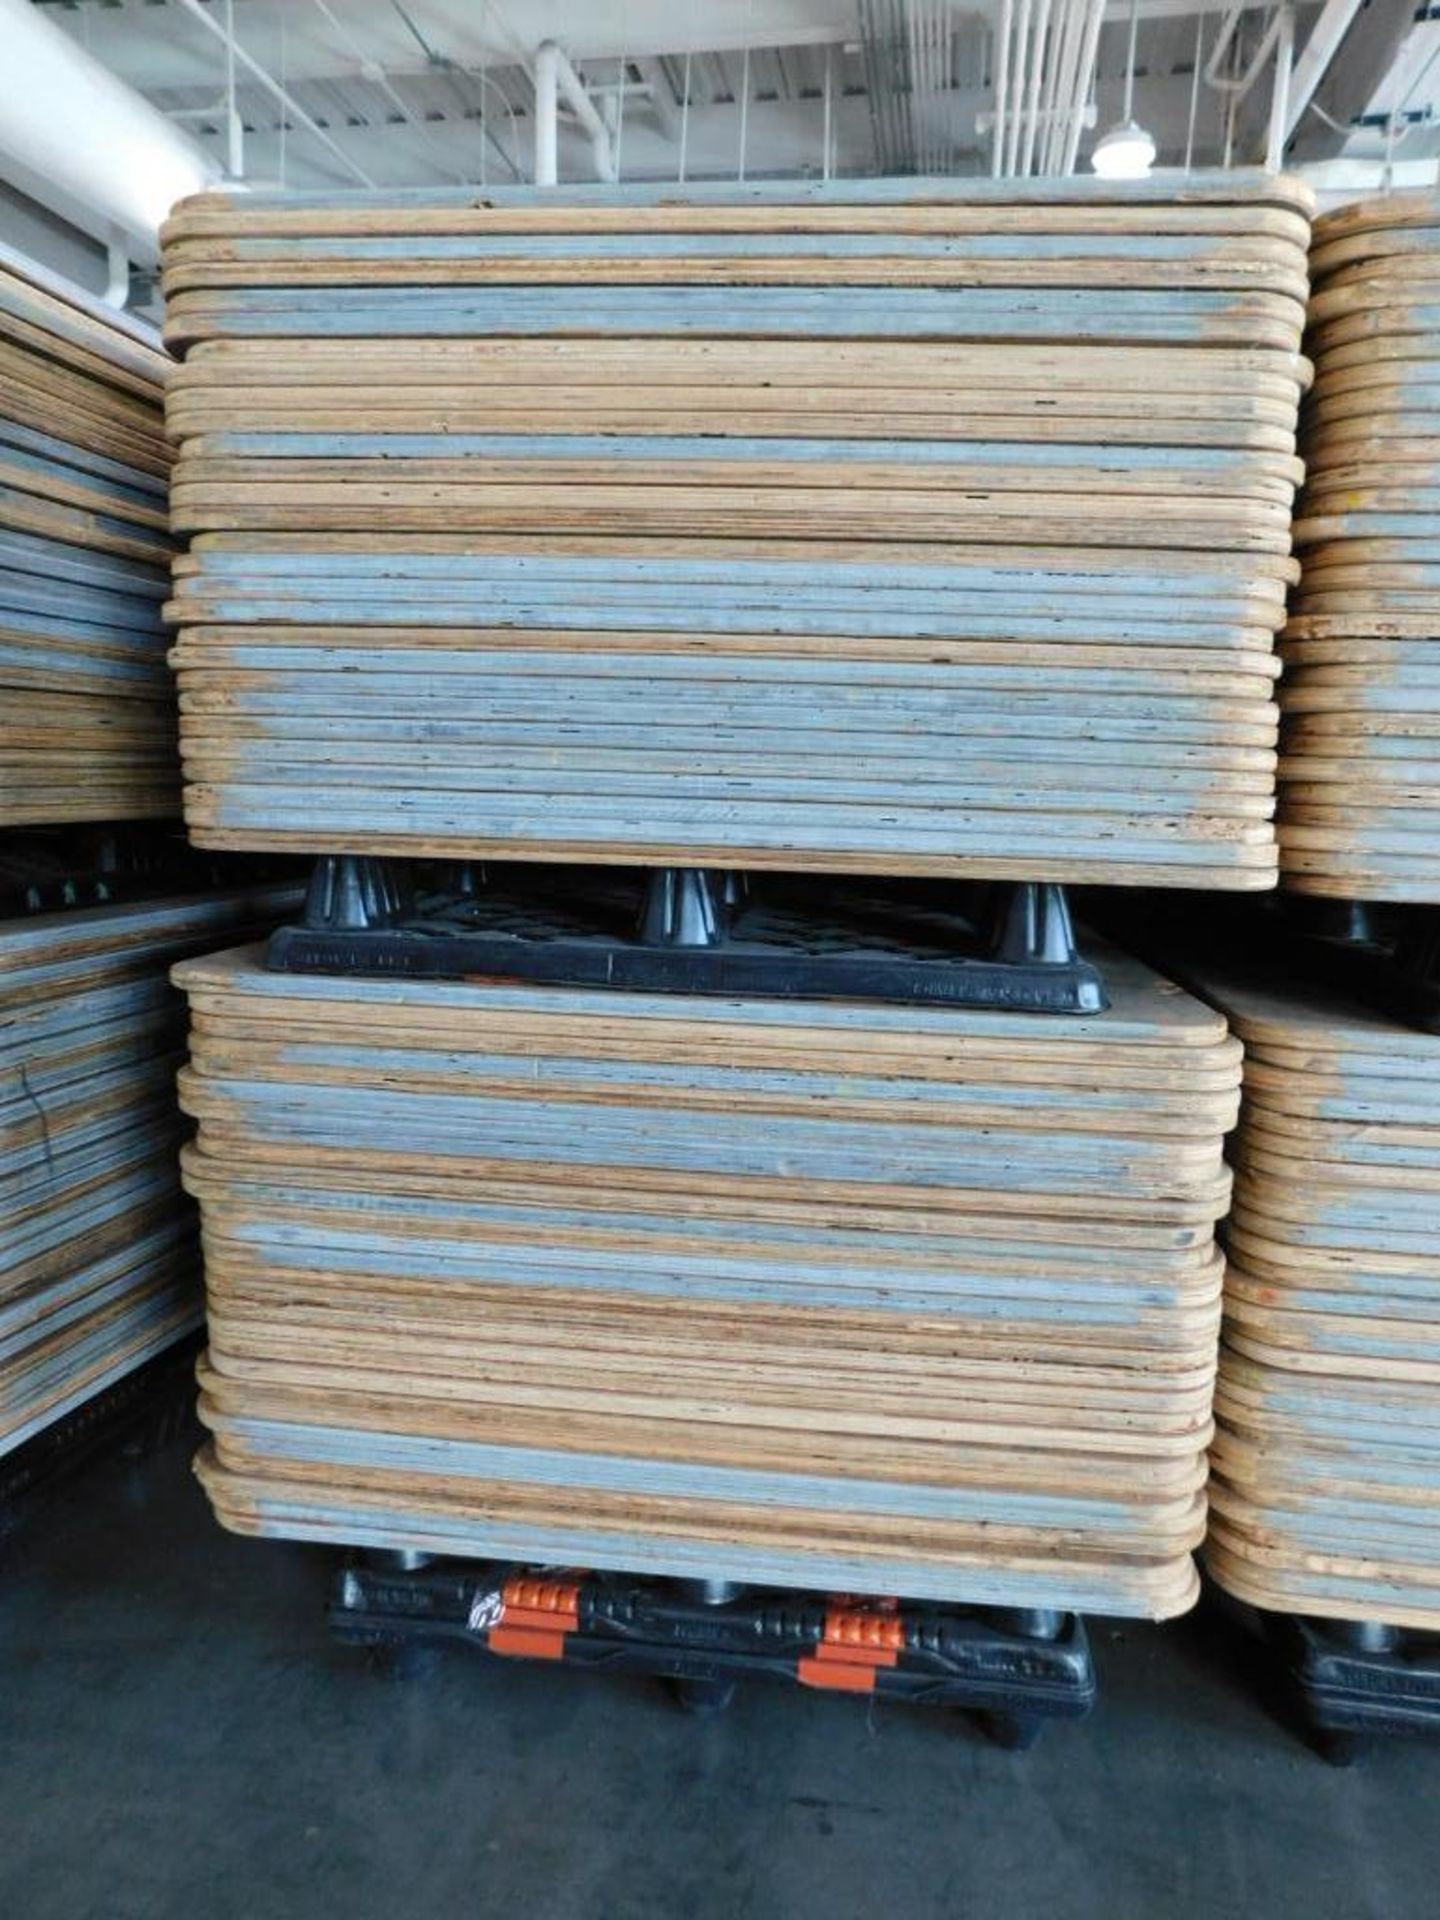 LOT: Large Quantity of 50" x 50" Wood Paper Roll Pallets on (12) Plastic Pallets (LOCATION: IN MAIL - Image 5 of 8